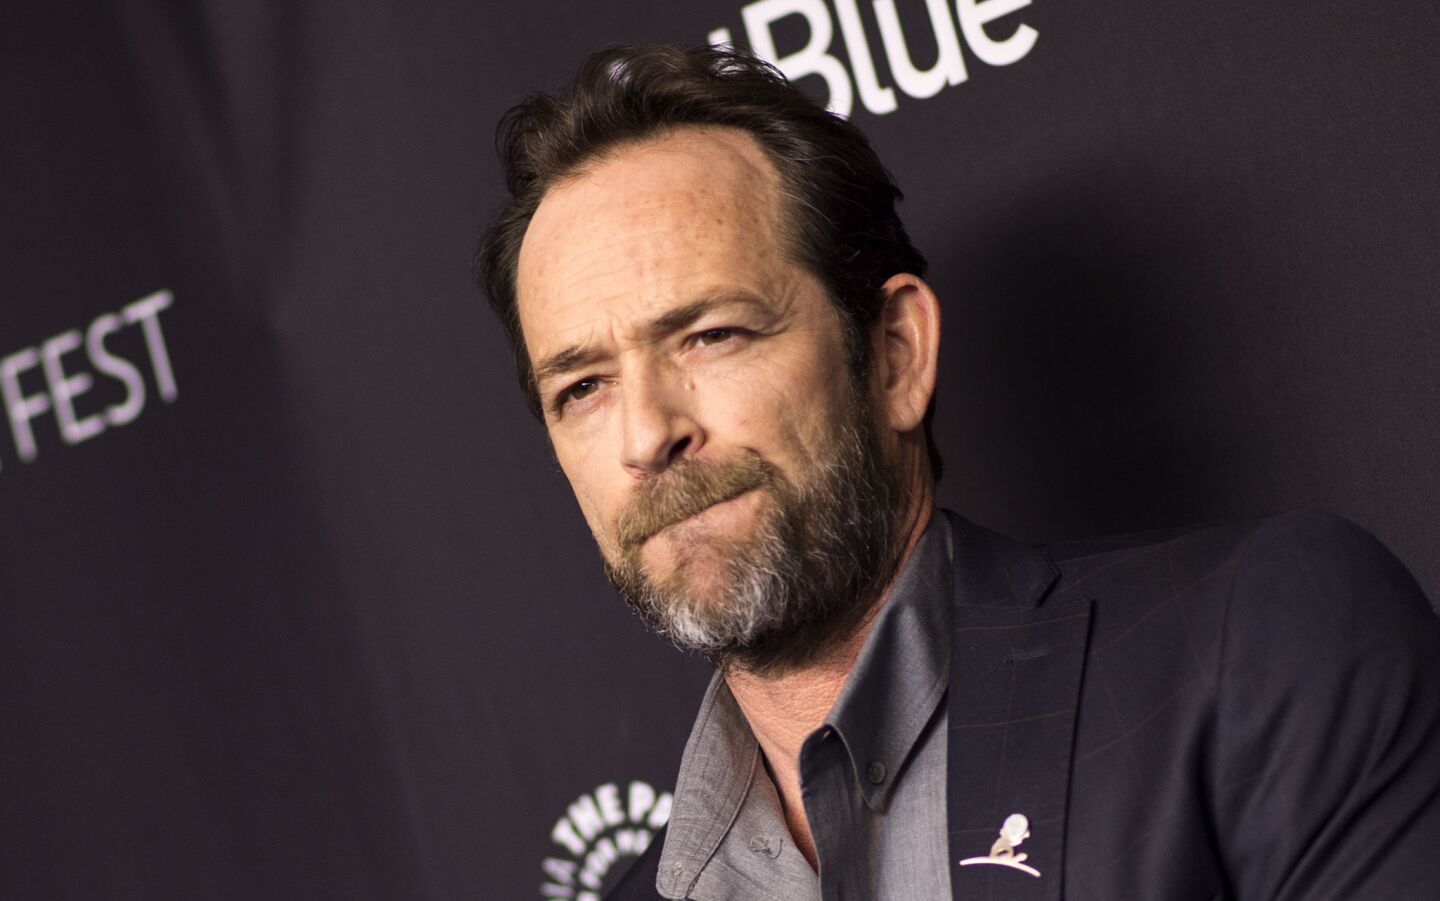 Luke Perry attends the 2018 PaleyFest screening of "Riverdale" at the Dolby Theatre in Los Angeles on March 25, 2018.